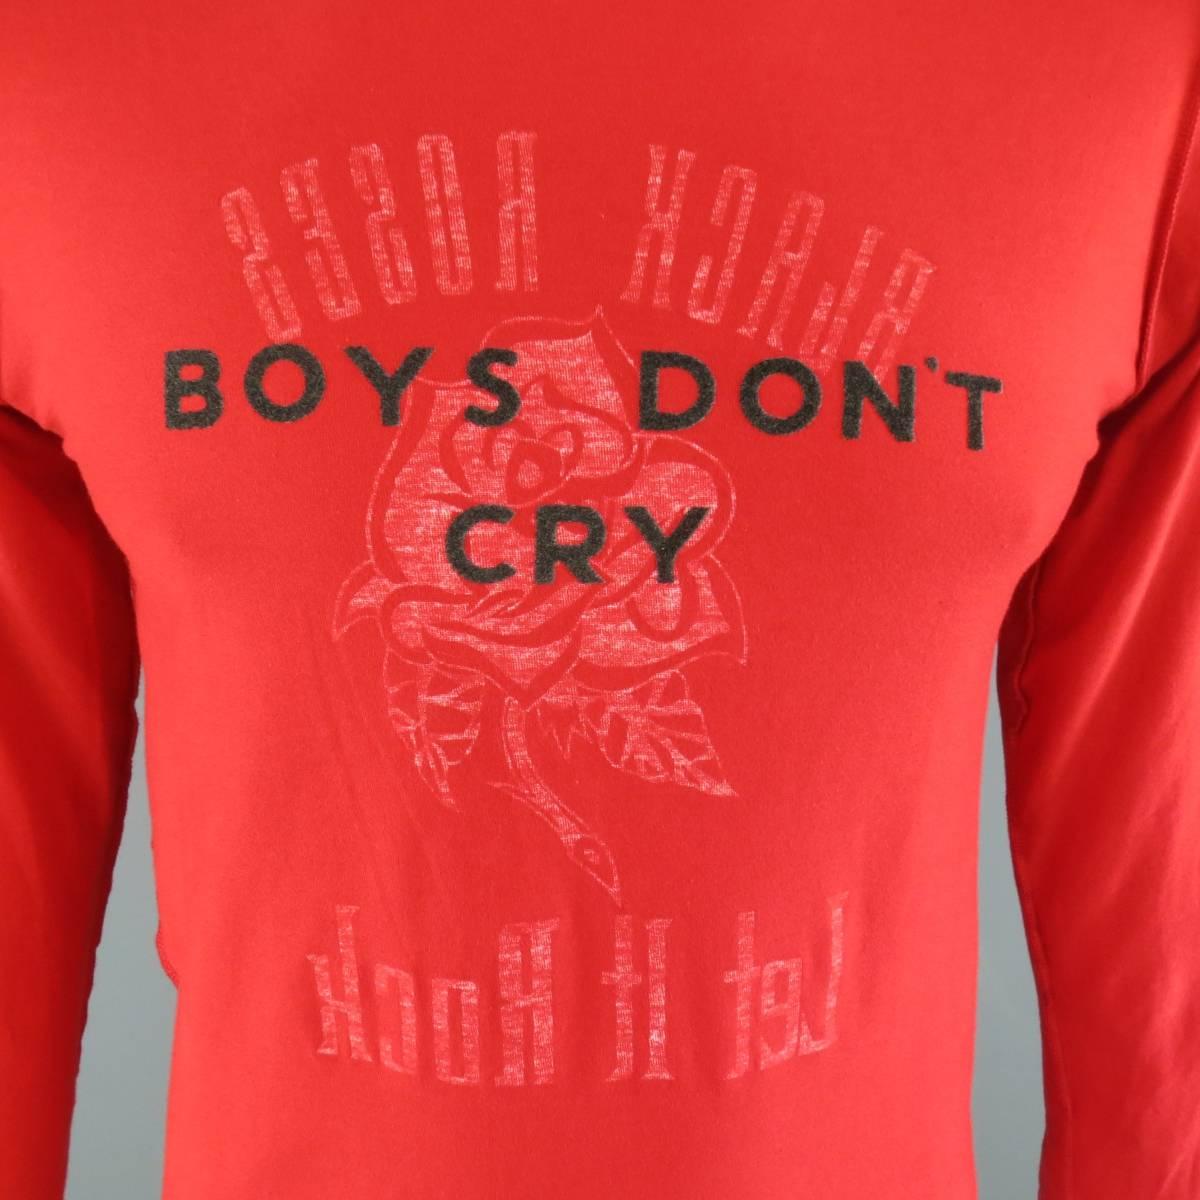 Rare JIL SANDER by Raf Simons long sleeve T-shirt in a vibrant red cotton jersey featuring an inside out "Black Roses Let it Rock" graphic with "Boys Don't Cry" printed over it. Made in Italy.
 
Excellent Pre-Owned